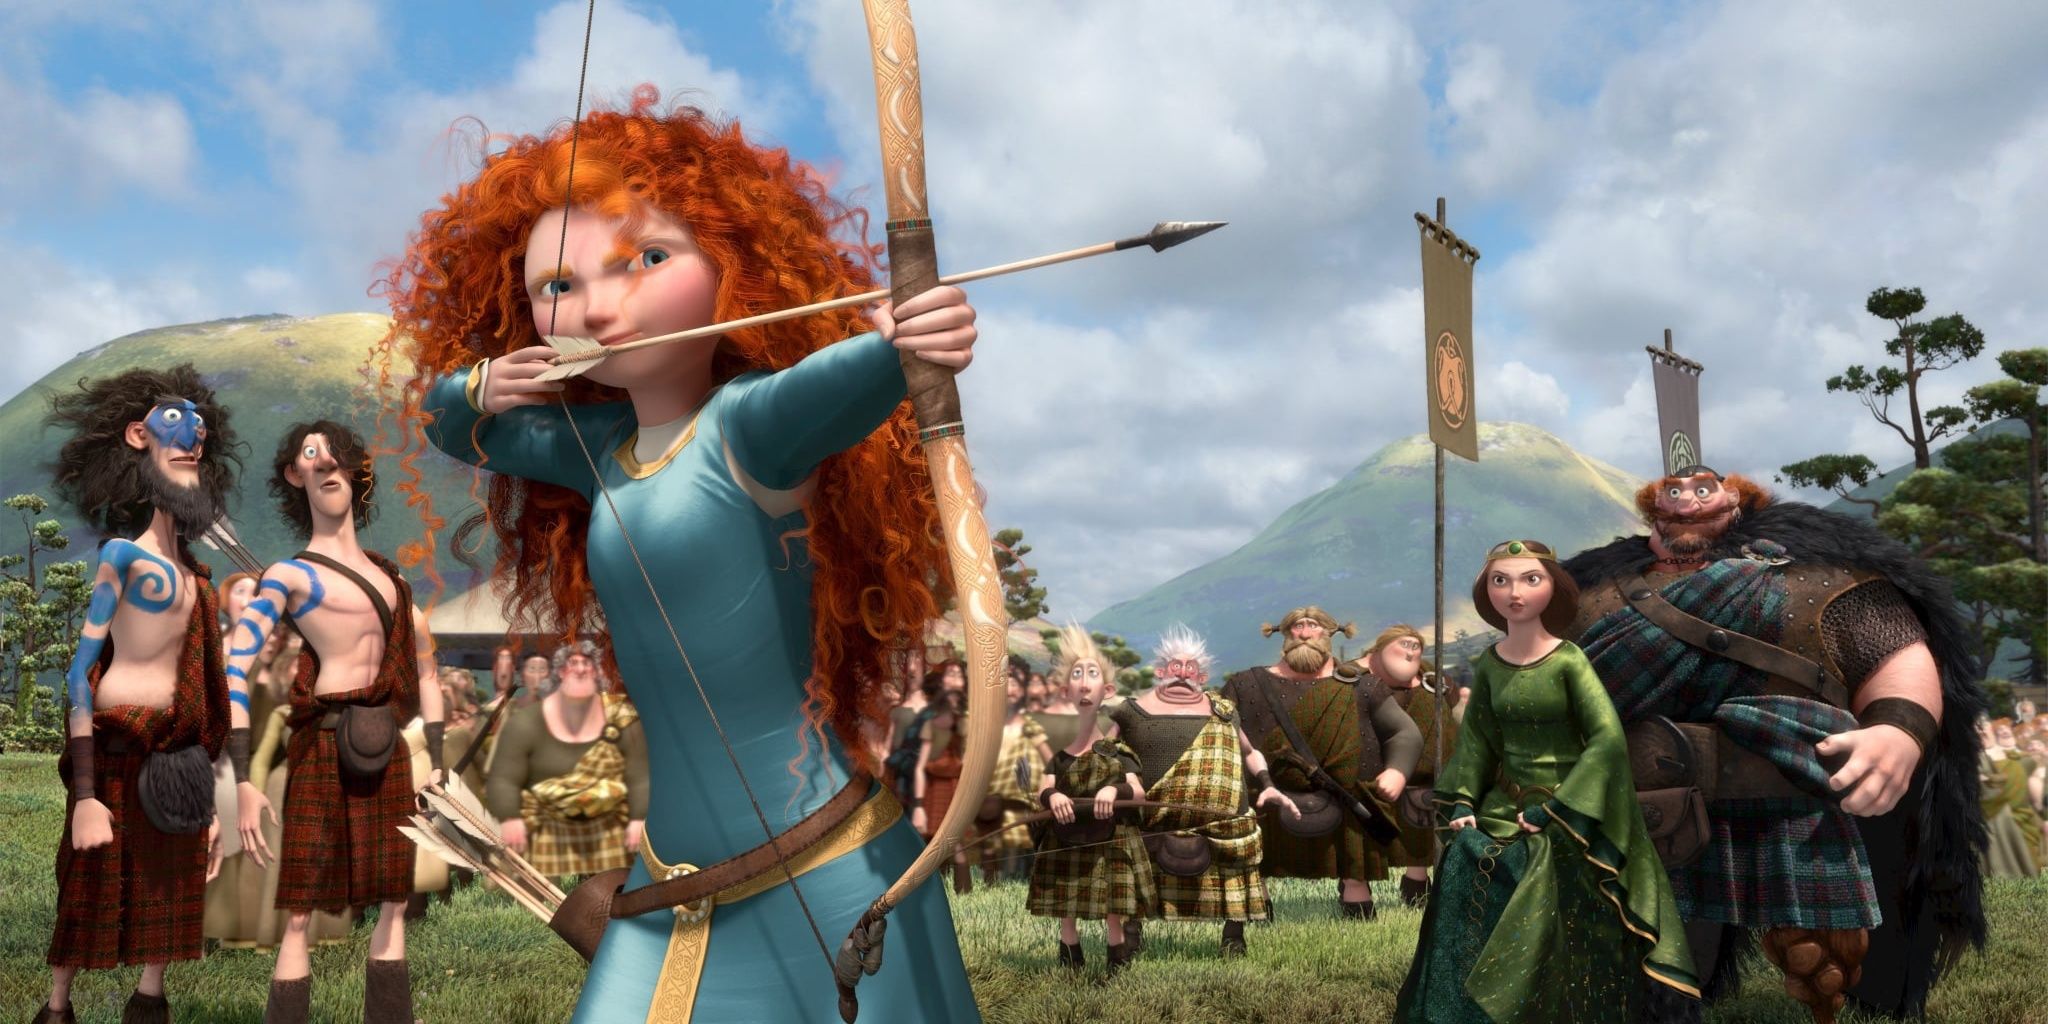 Merida using her bow and arrow in Brave Cropped